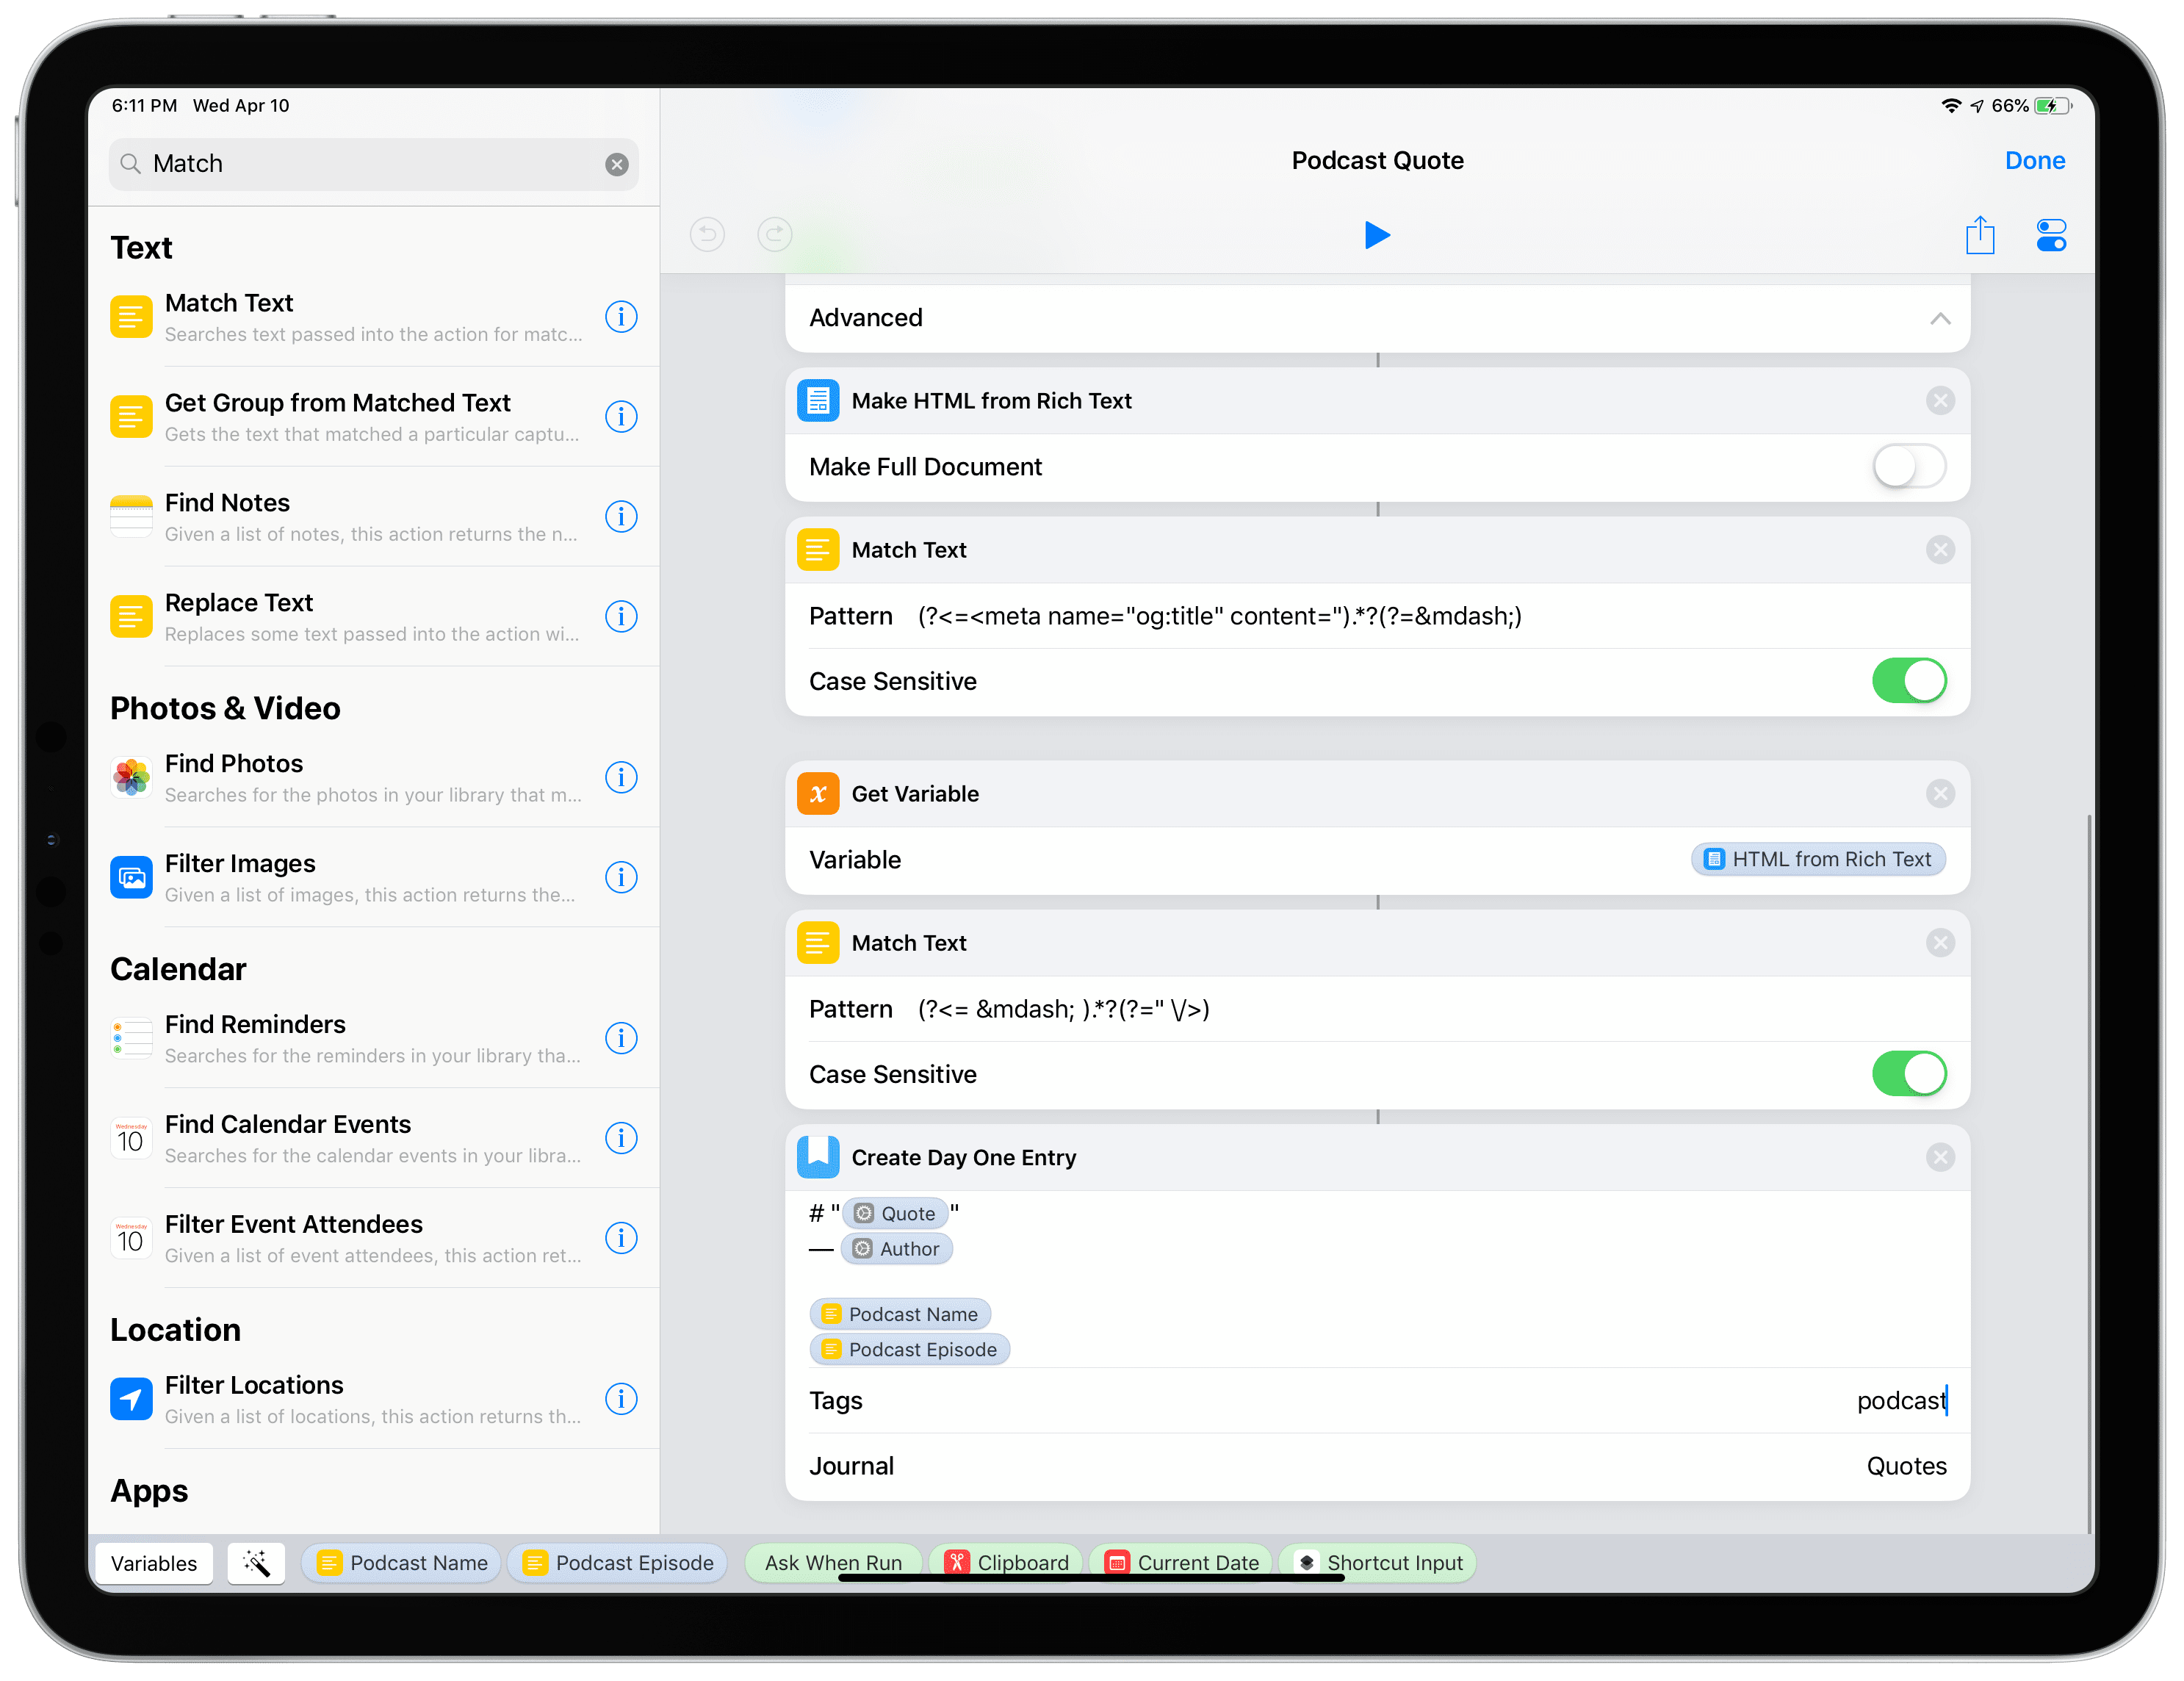 iPad screenshot of the Shortcuts app showing the DayOne entry to be created